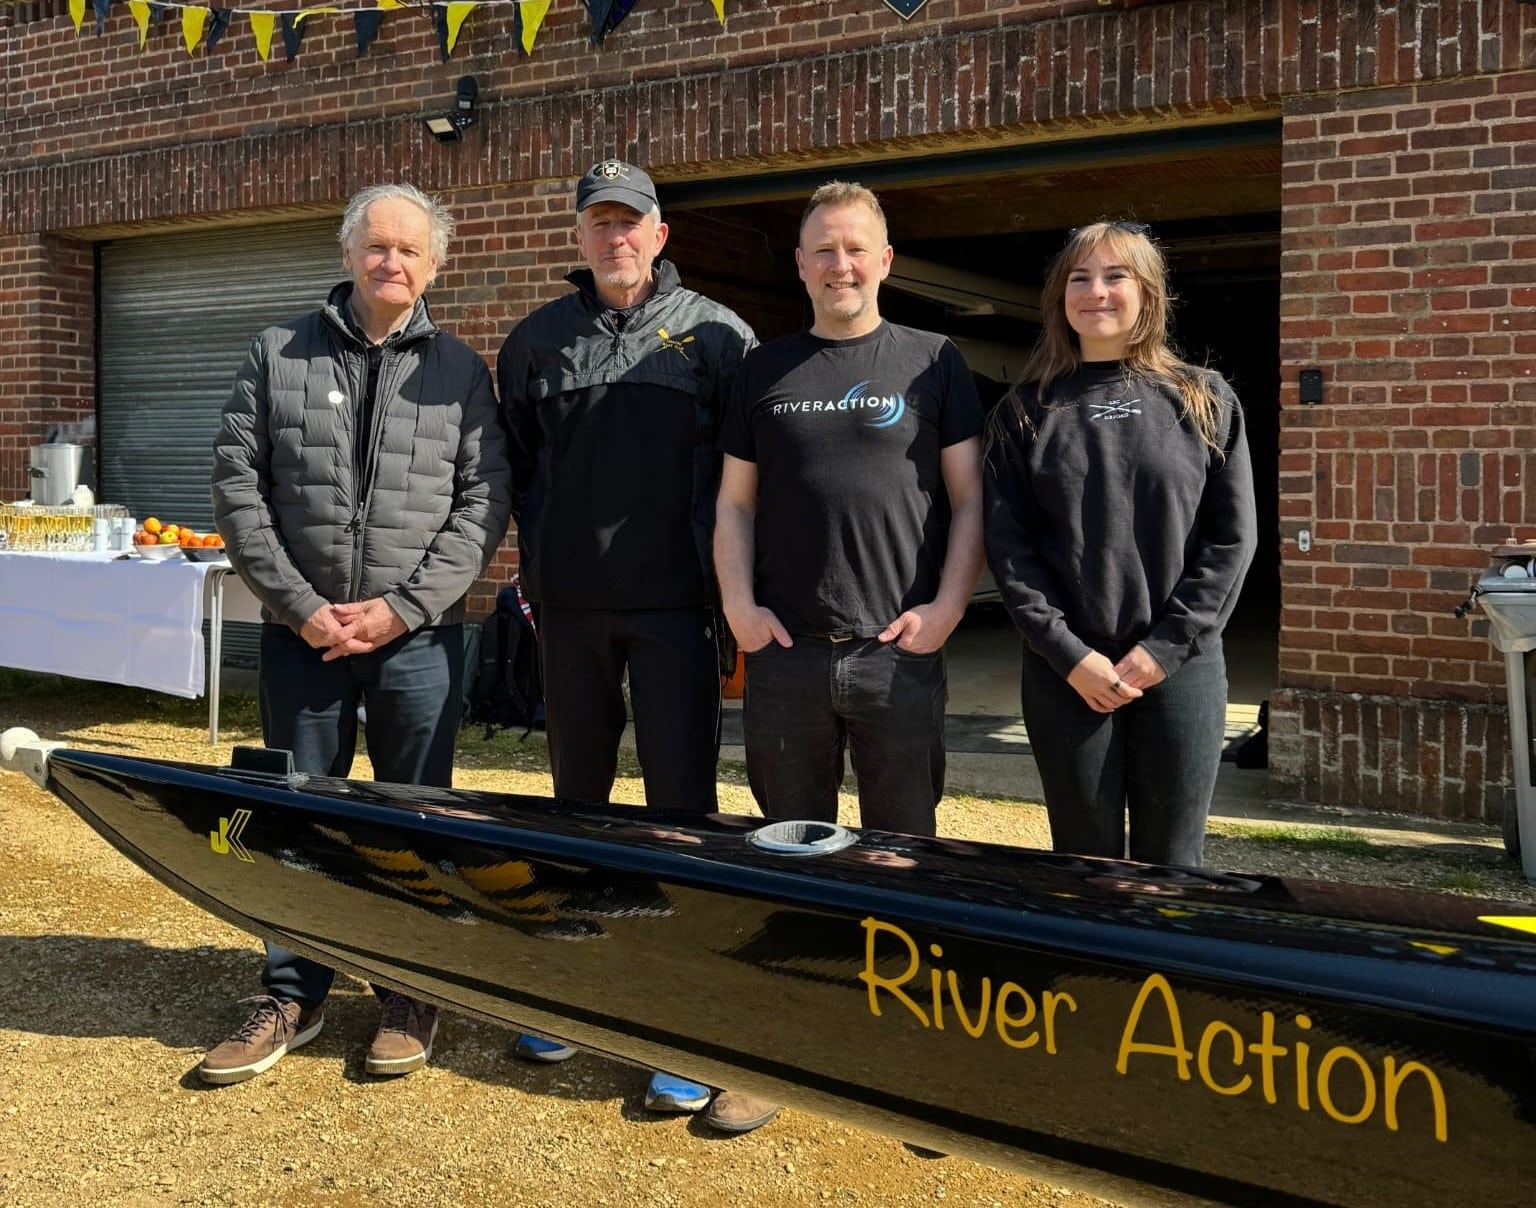 Picture of the named boat with representatives from Linacre and River Action.